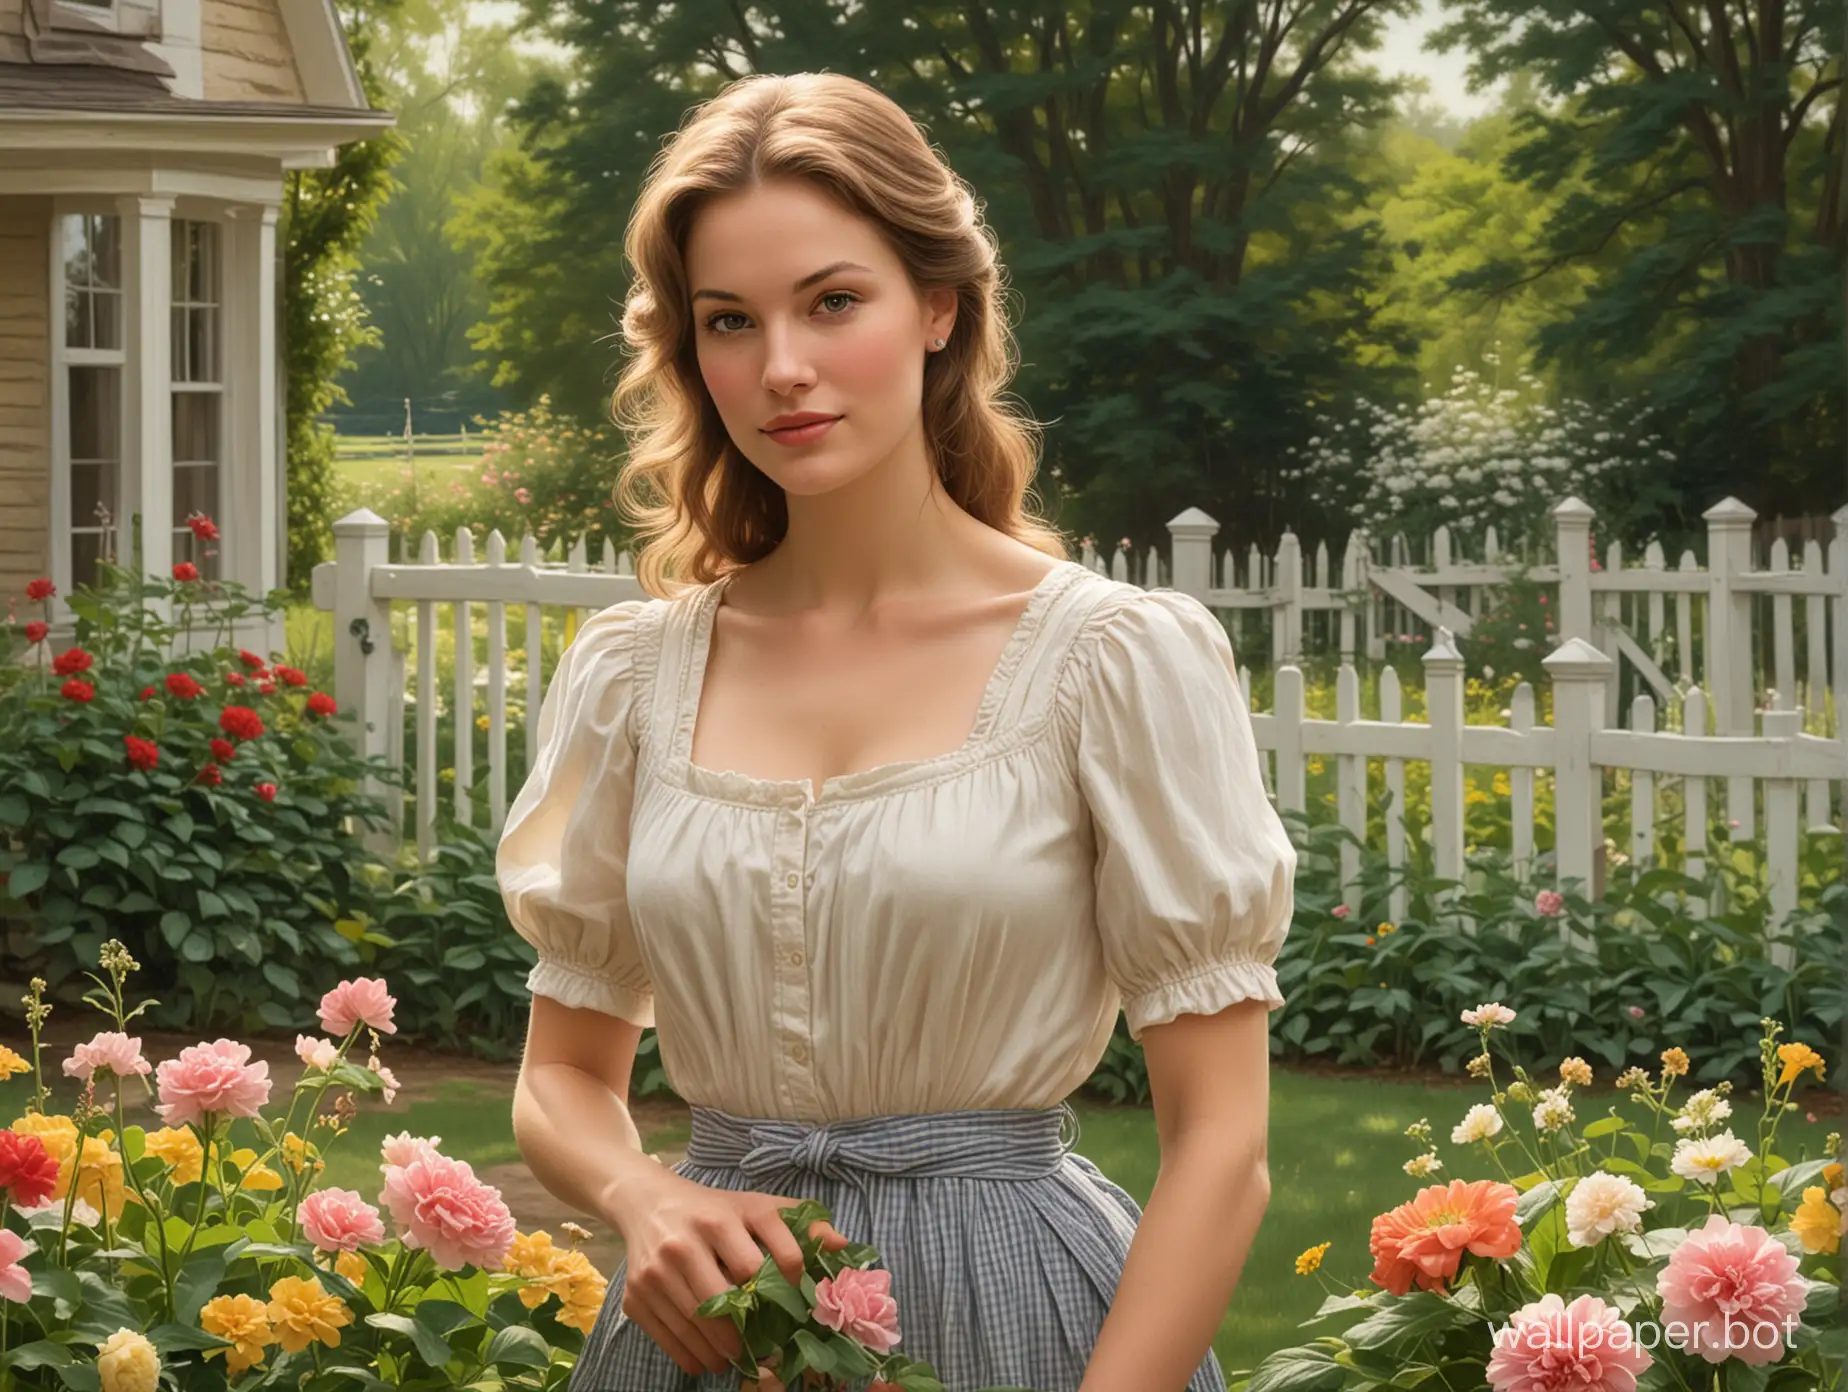 A beguiling and captivating figure of innocent and wholesome, yet tantalizing and alluring feminine beauty of an American farm wife as she tends her garden, painting